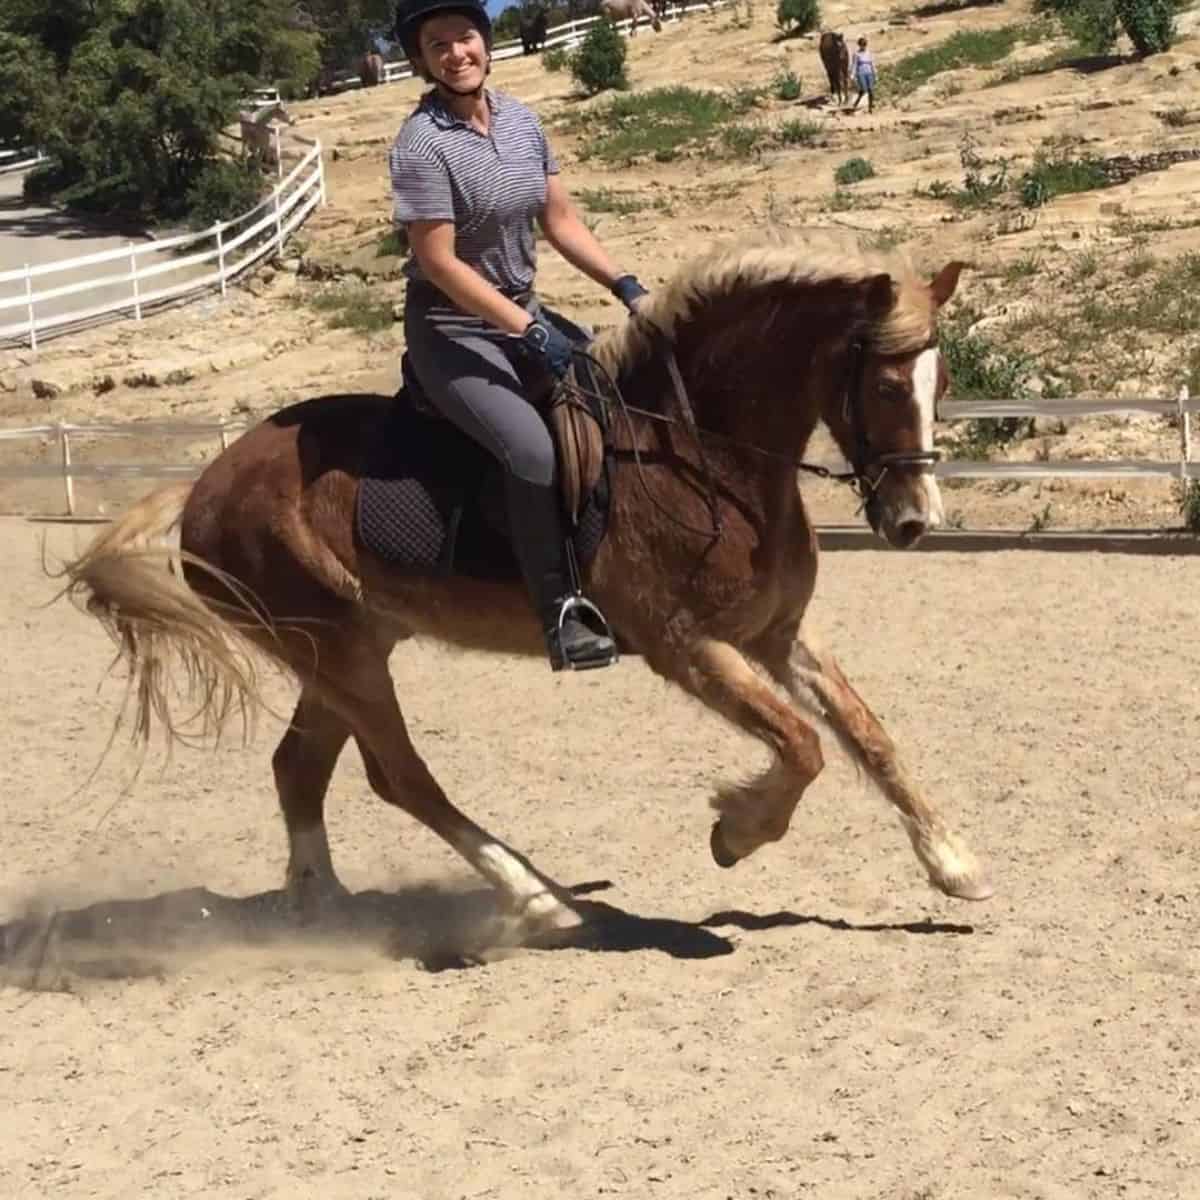 A horse trainer riding a spooked brown horse.